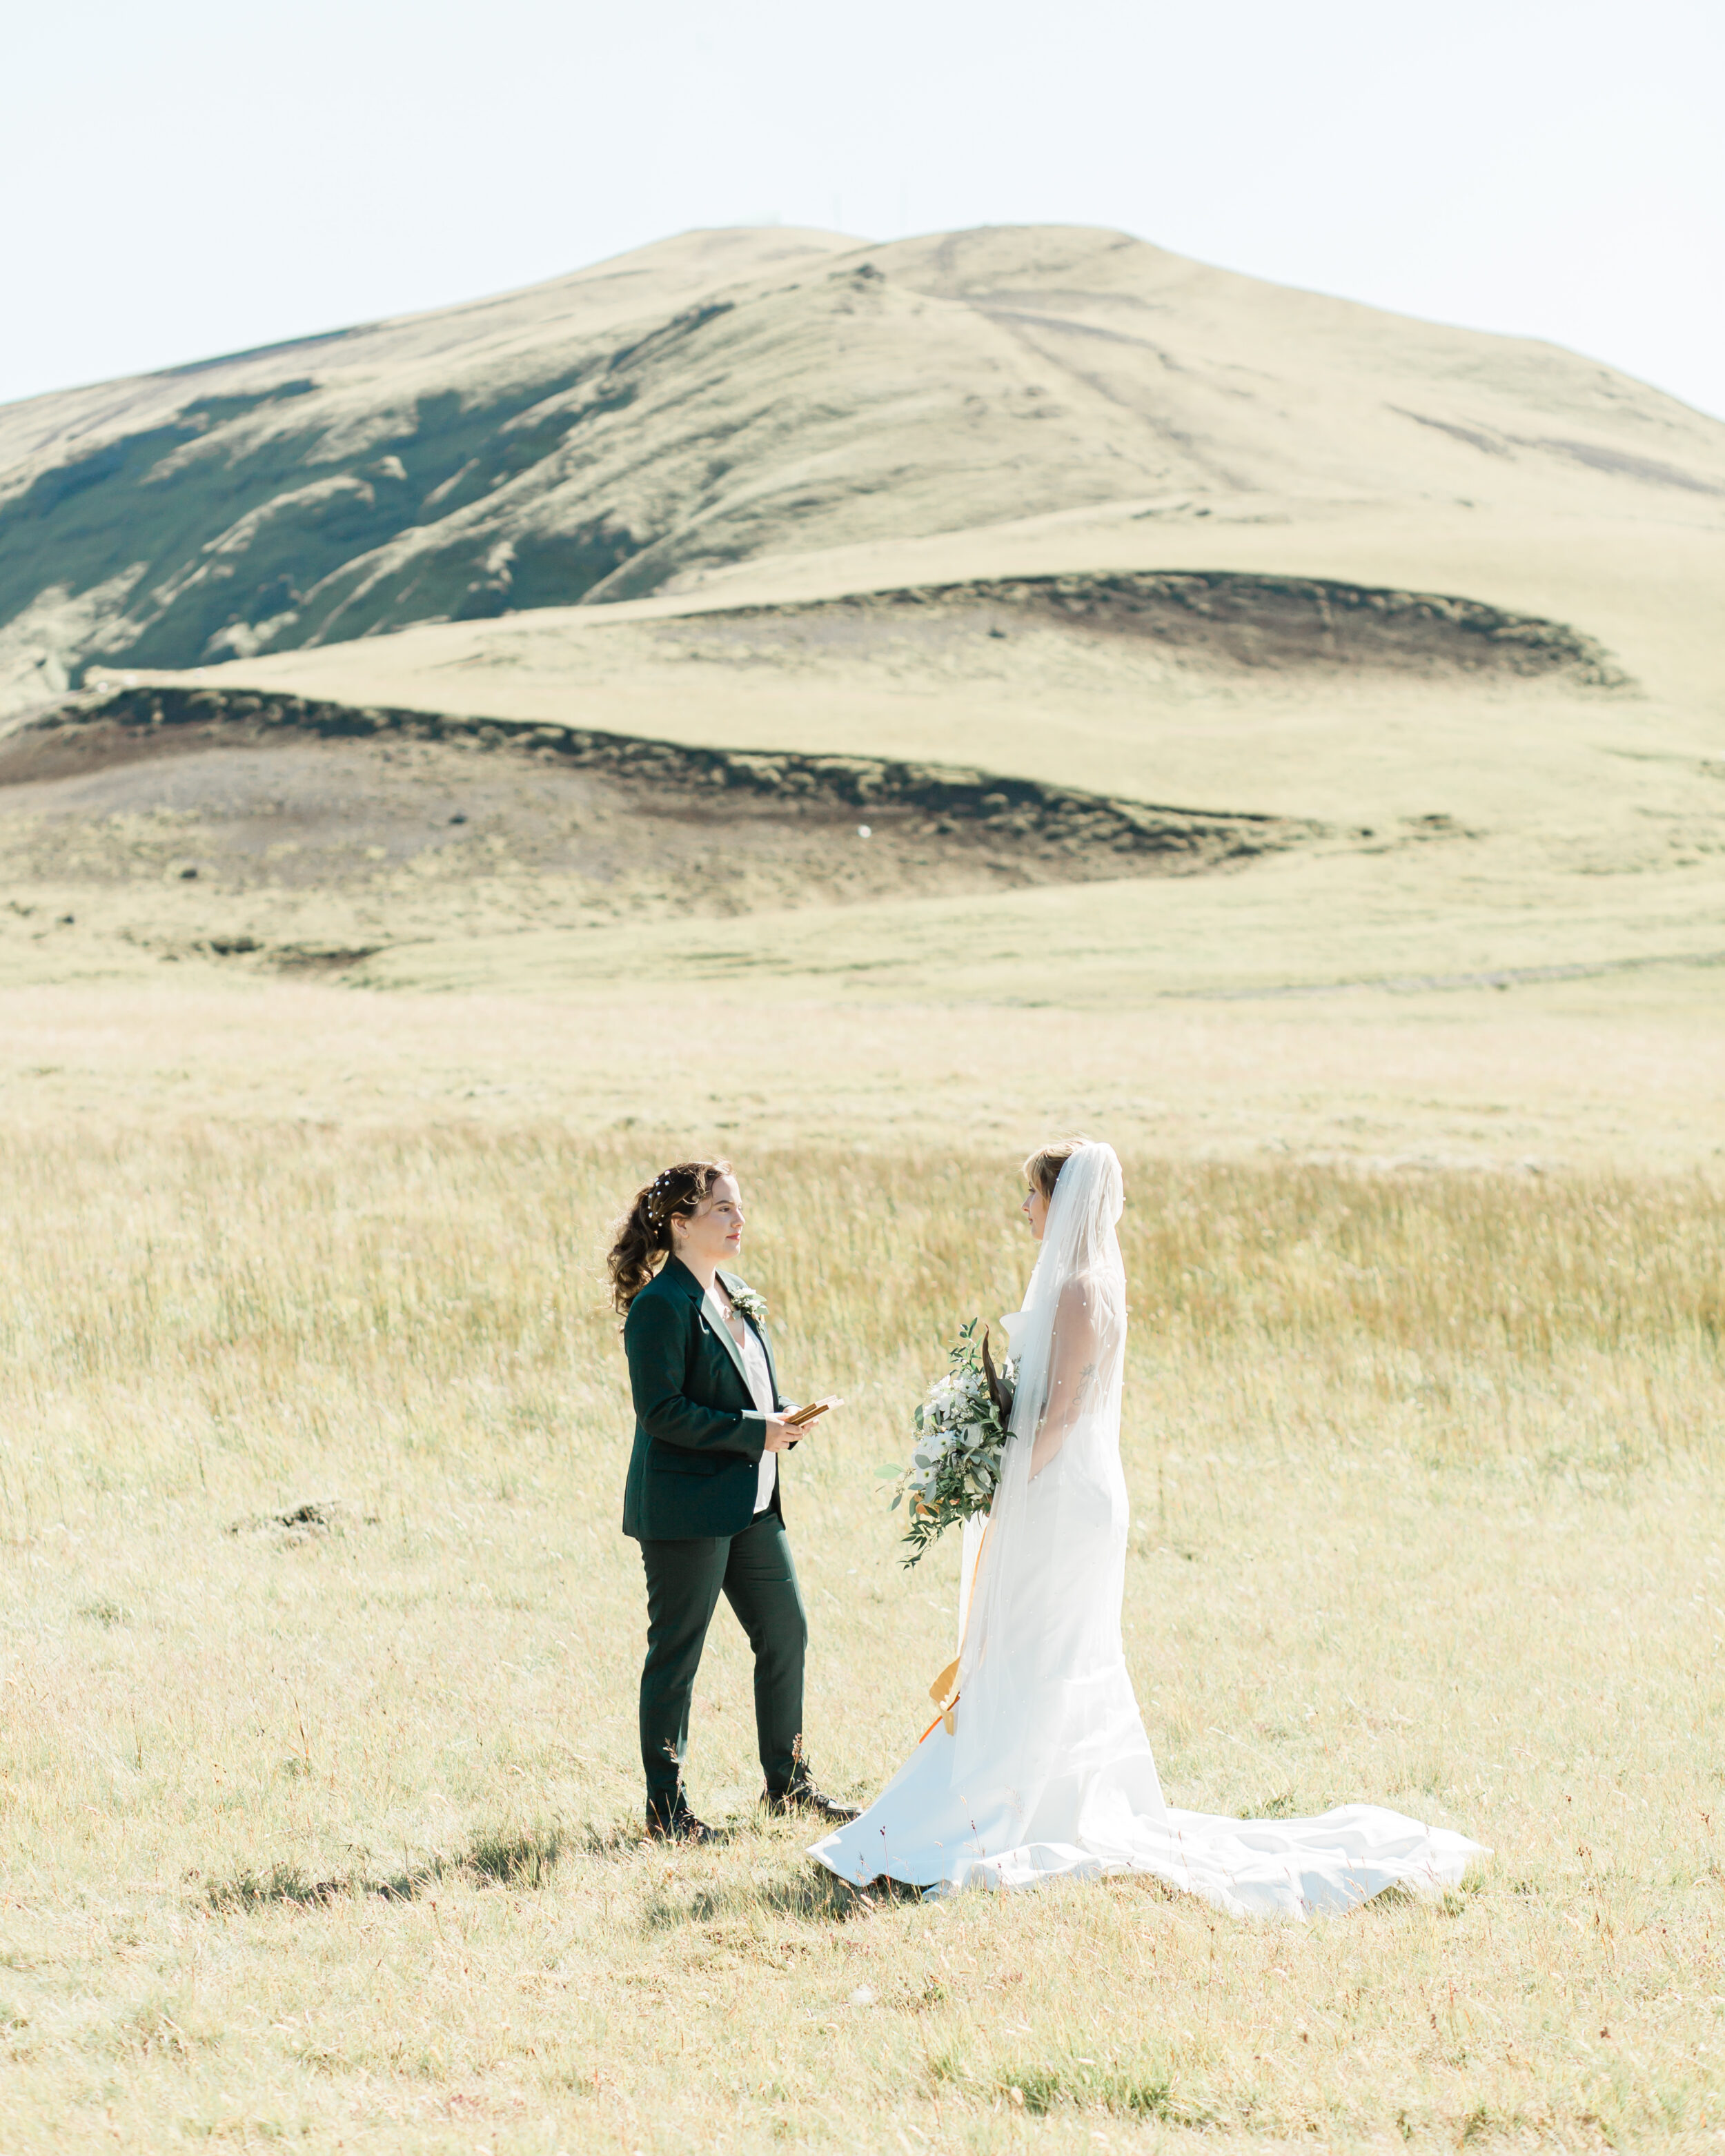 Newlyweds stand in a large meadow in Iceland with a mountain in the distance.